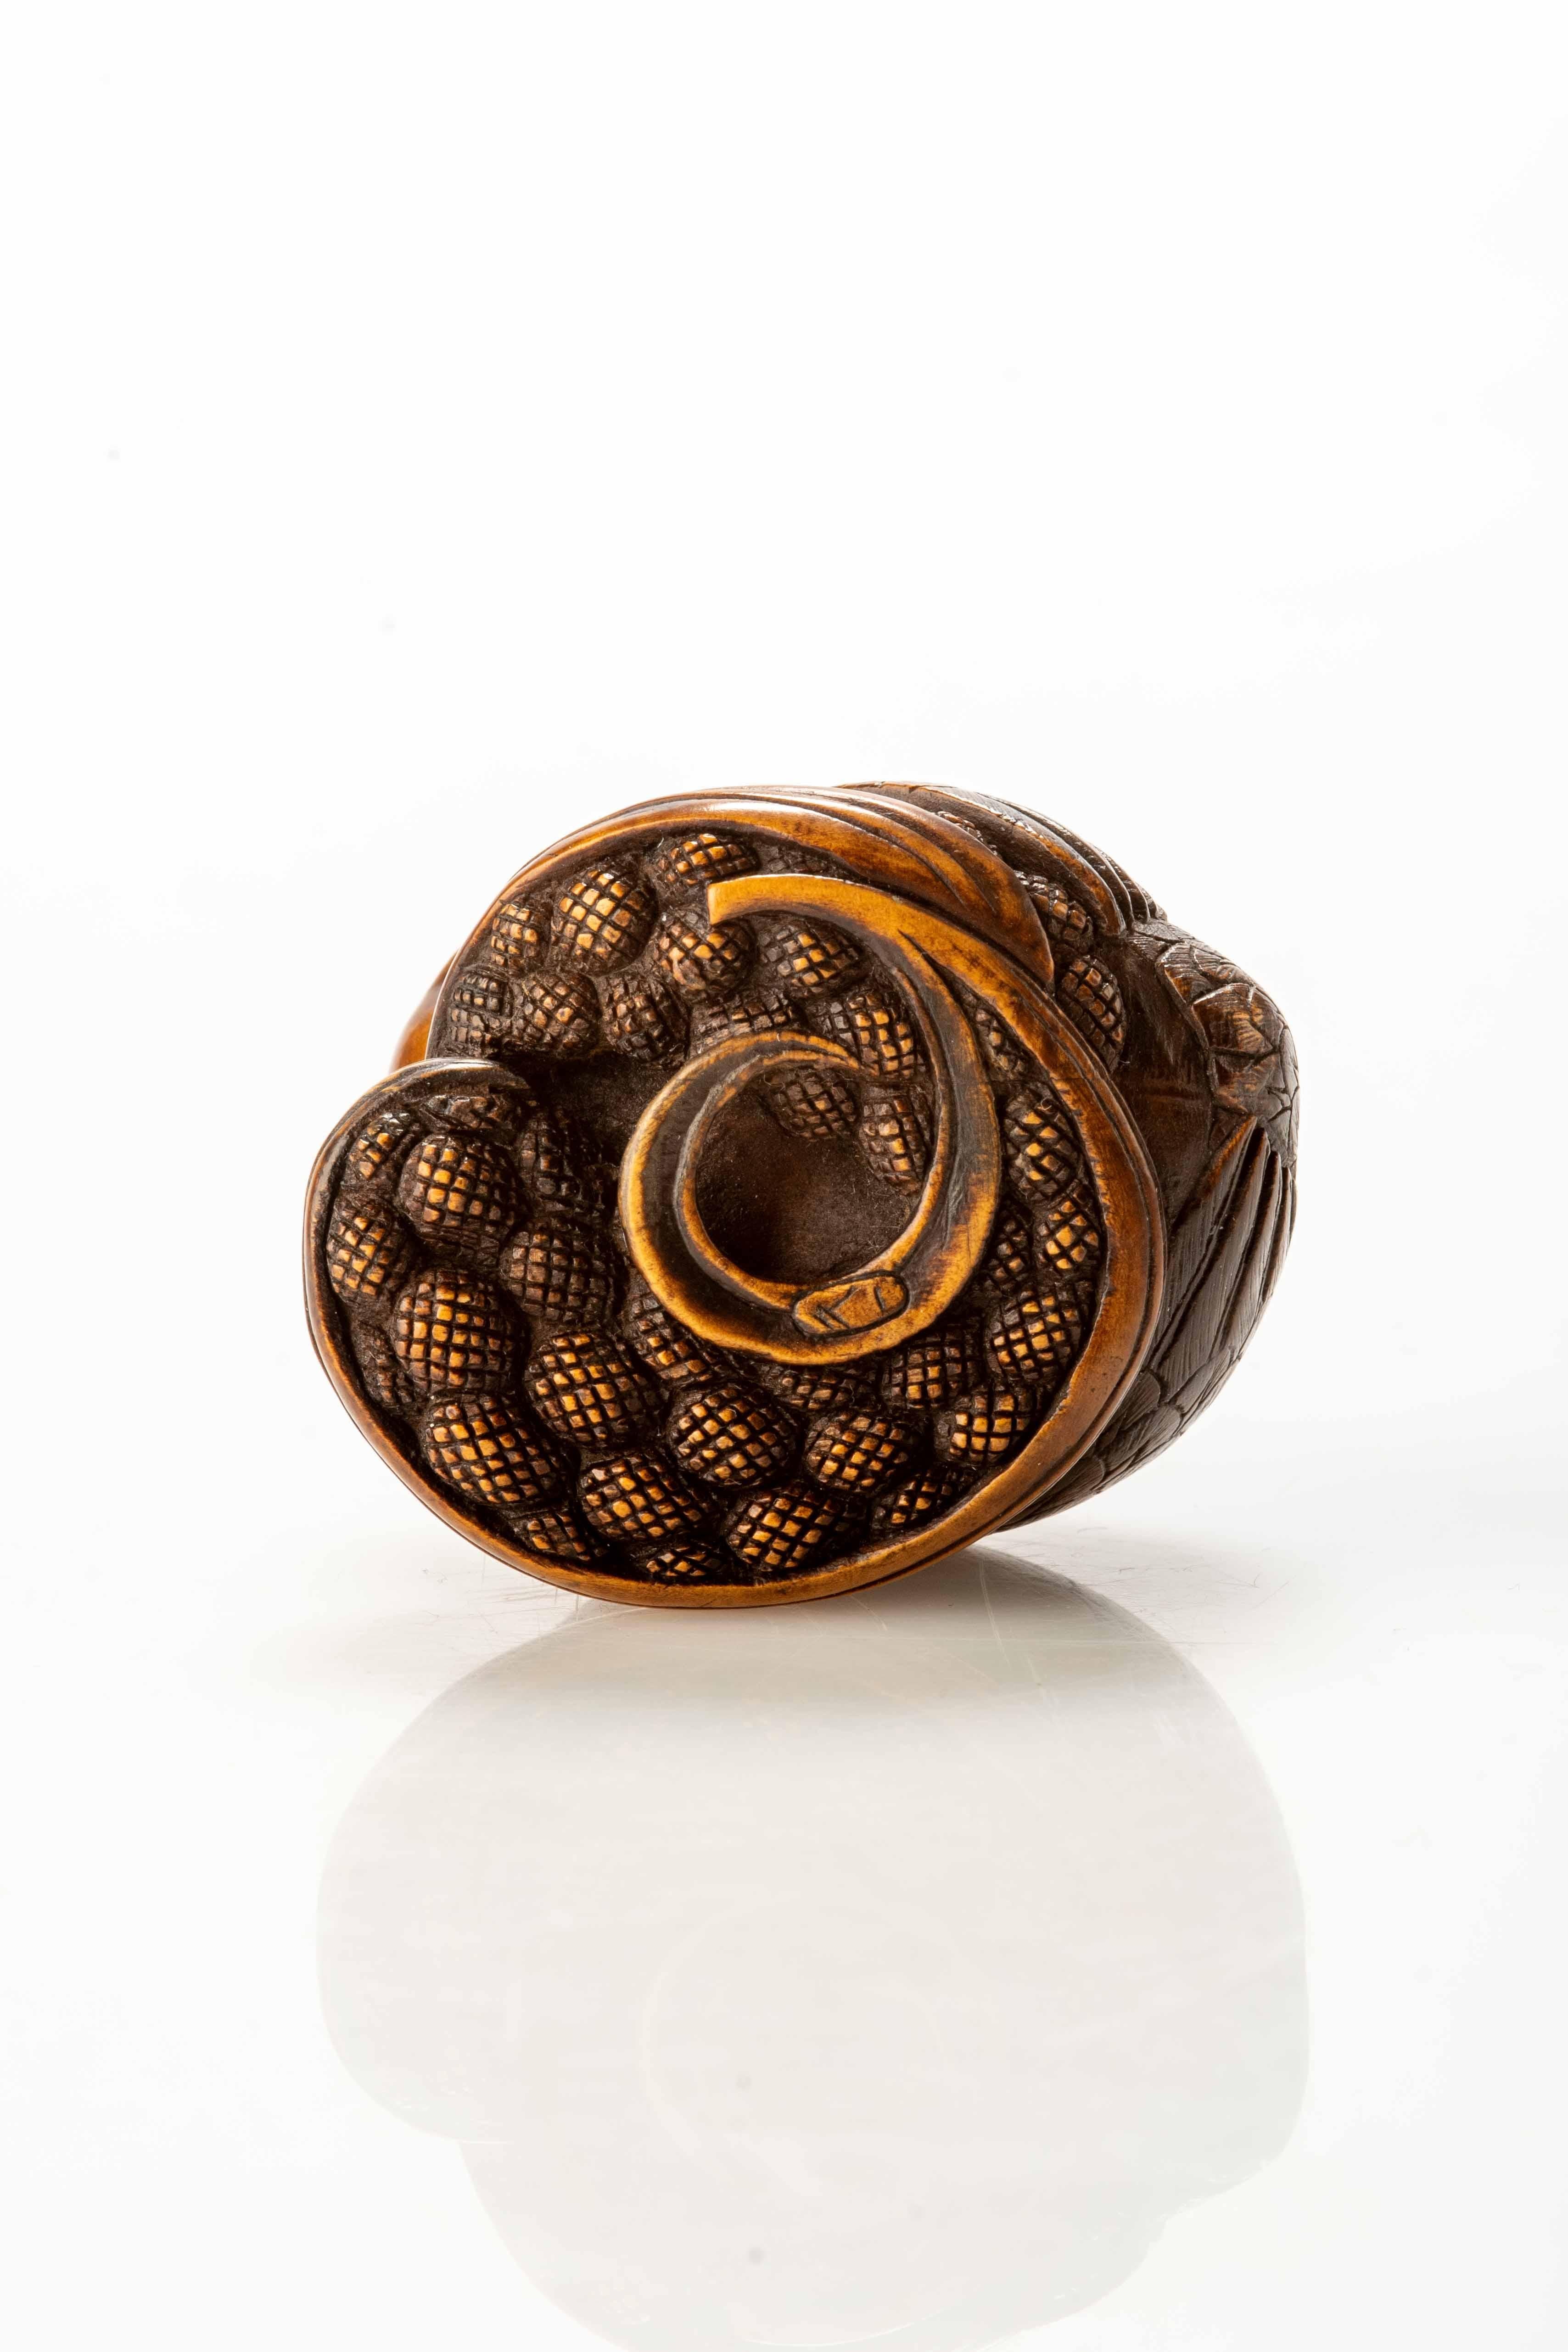 Carved A Boxwood Netsuke Depicting A Pair Of Quails Crouching On Millet